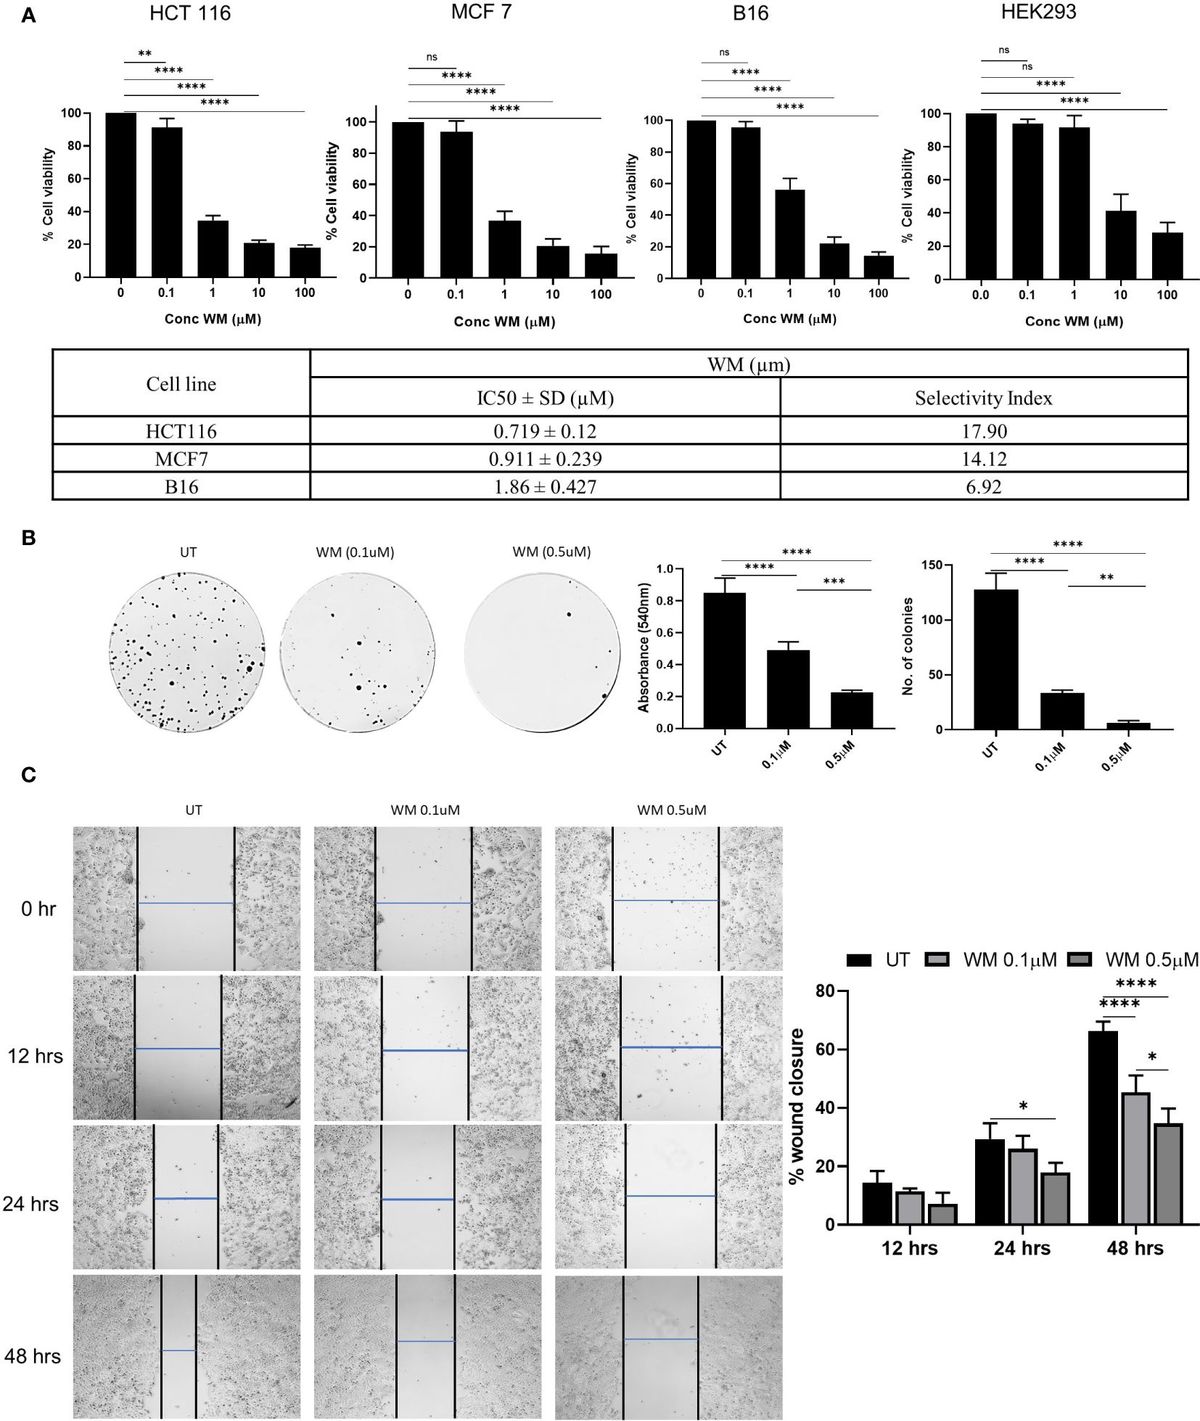 Withametelin inhibits TGF-β induced Epithelial-to-Mesenchymal Transition and Programmed-Death Ligand-1 expression in vitro